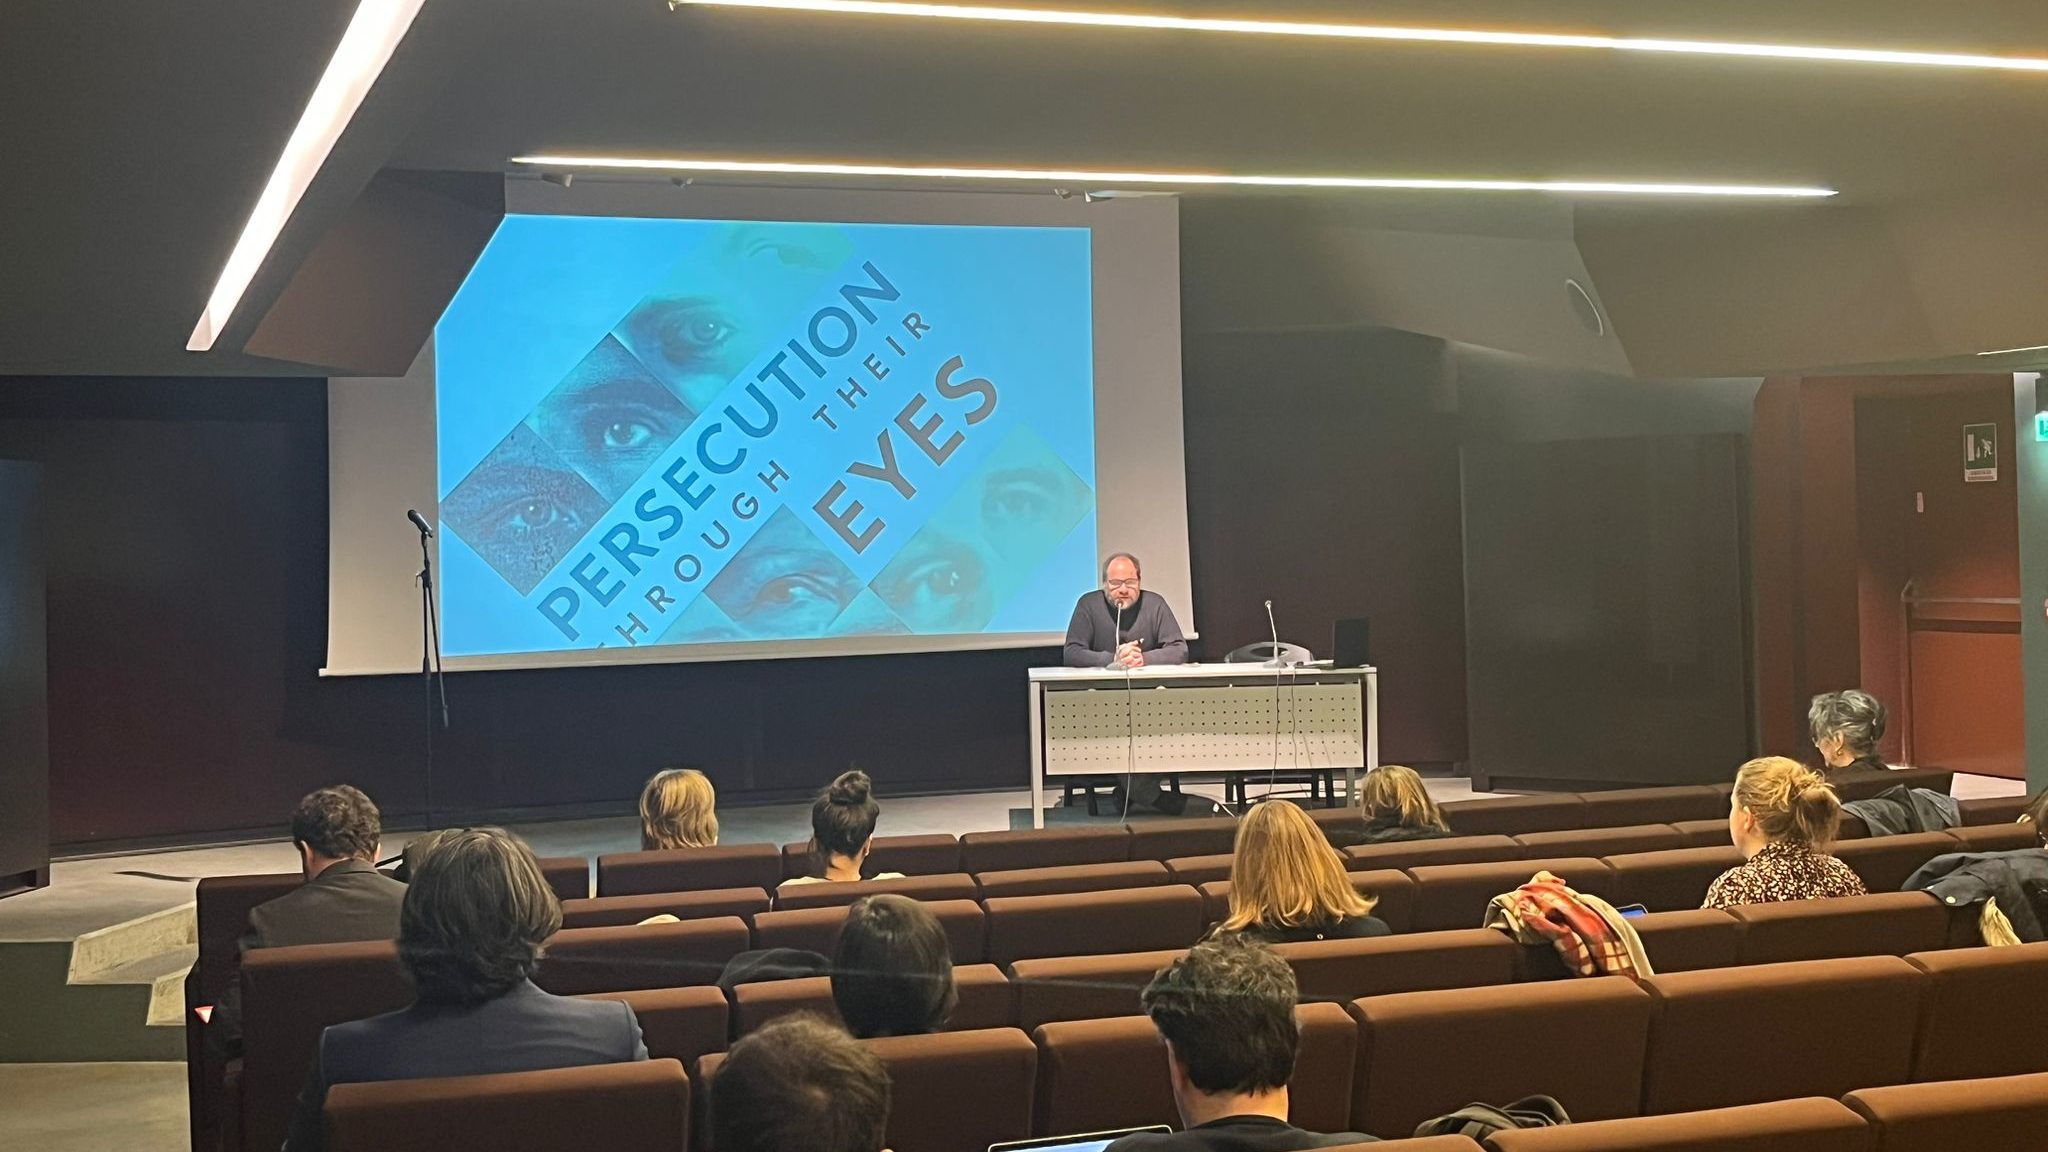 A two-day workshop in the Shoah Memorial in Milan marks an important step for the “Persecution Through Their Eyes” project